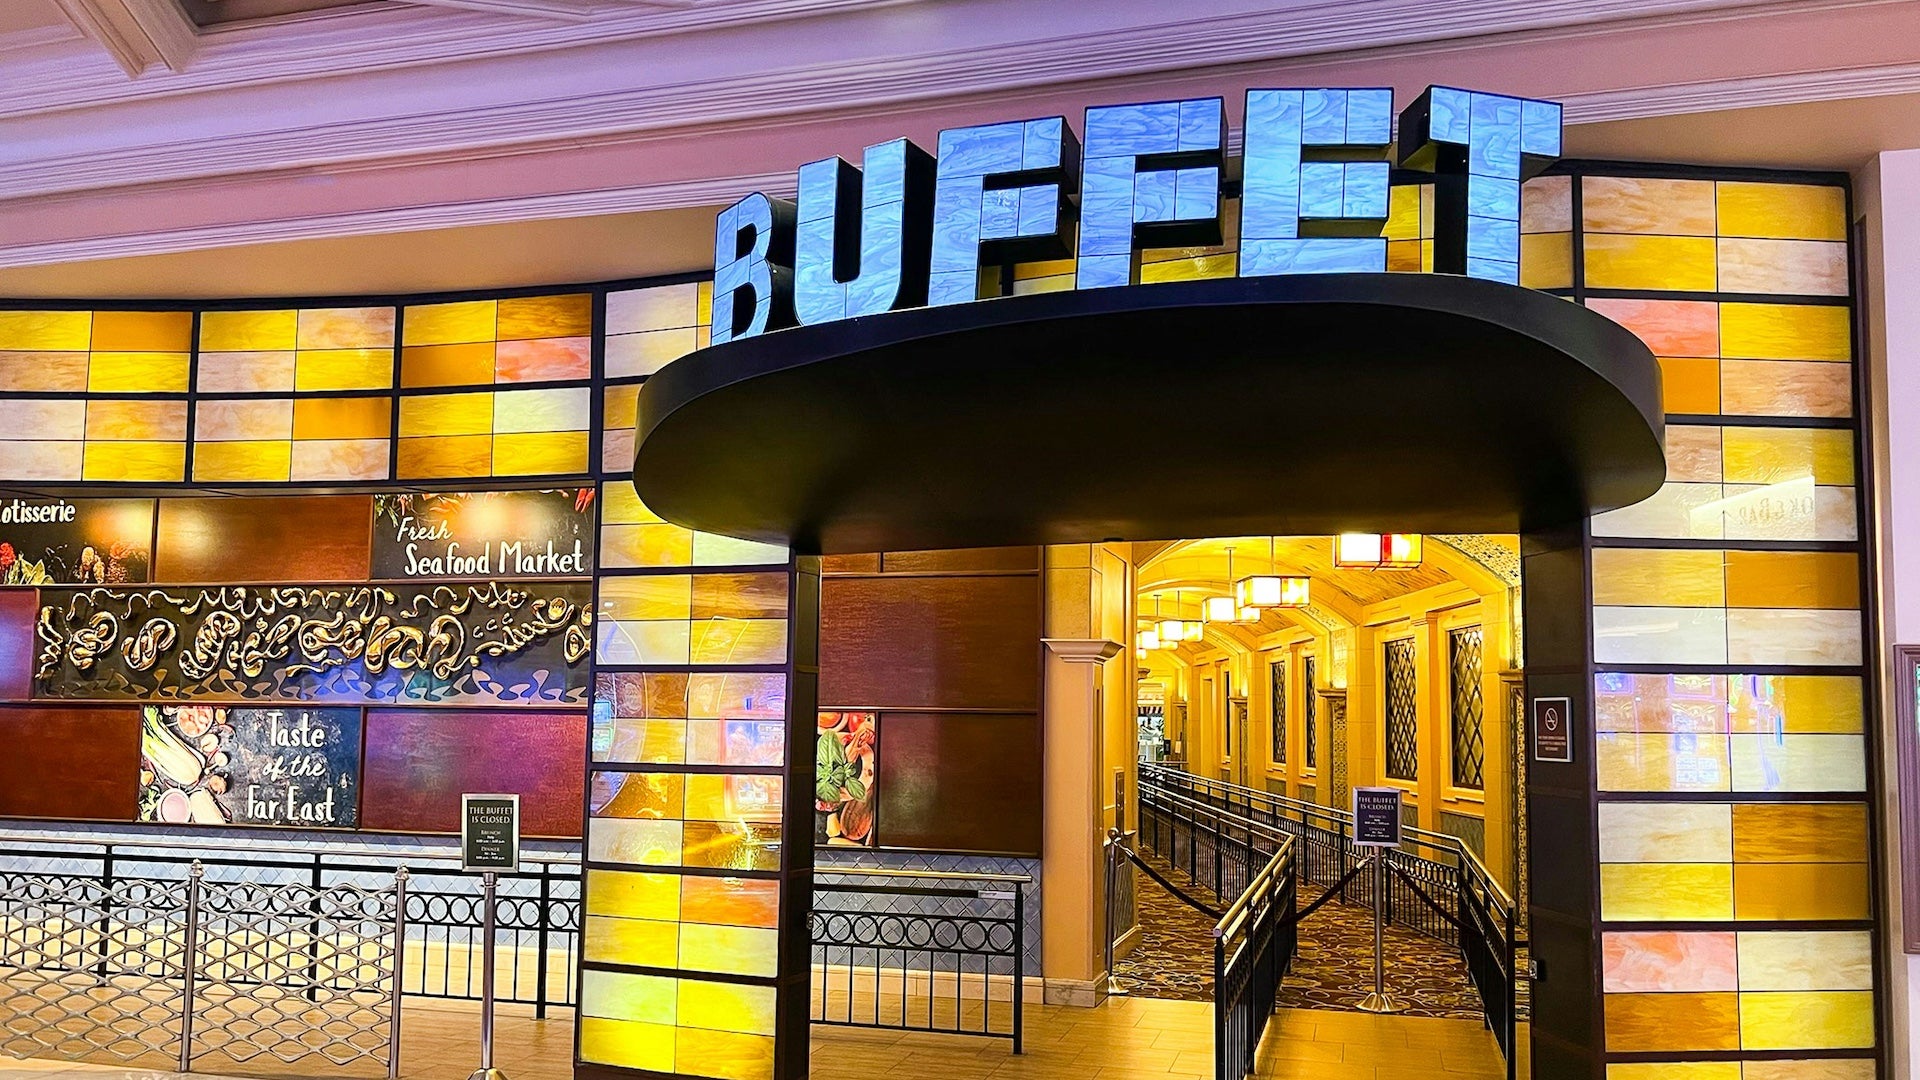 Entrance to a restaurant with a large blue sign that says "Buffet"